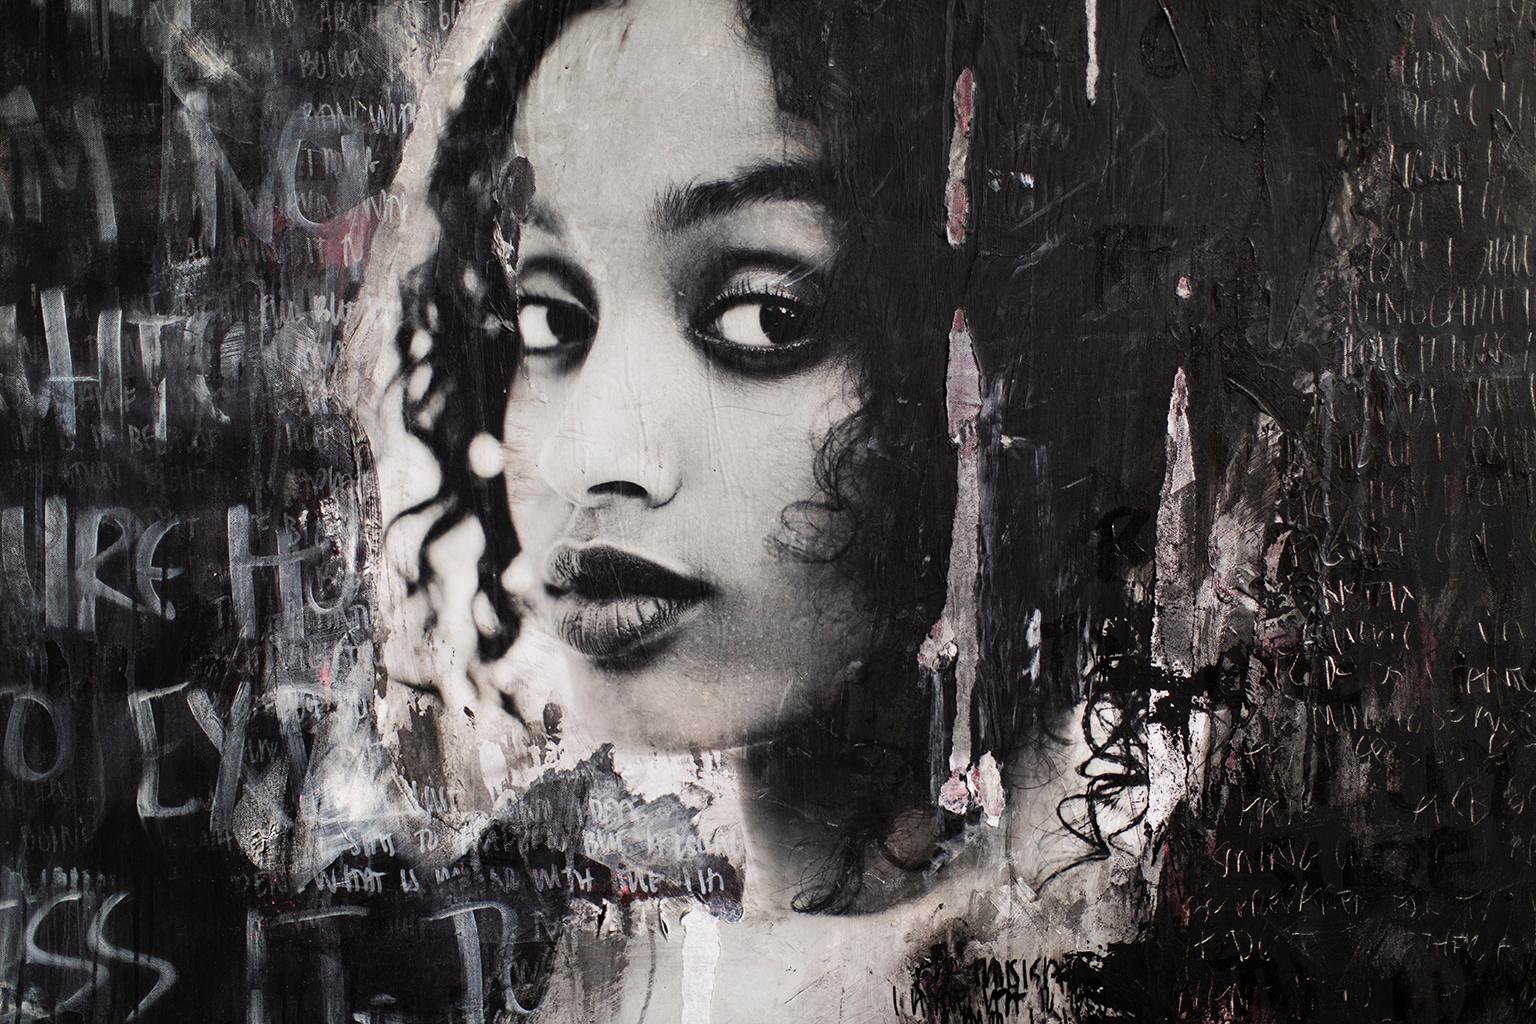 Modern Art, Portrait Painting, Mixed Media Portrait Art-Lost Between The Lines

ABOUT THIS PIECE:
“Lost Between the Lines, (Behtyie-A13)” is mixed media portrait art by Addison Jones featuring her own portrait photography. It’s produced using a